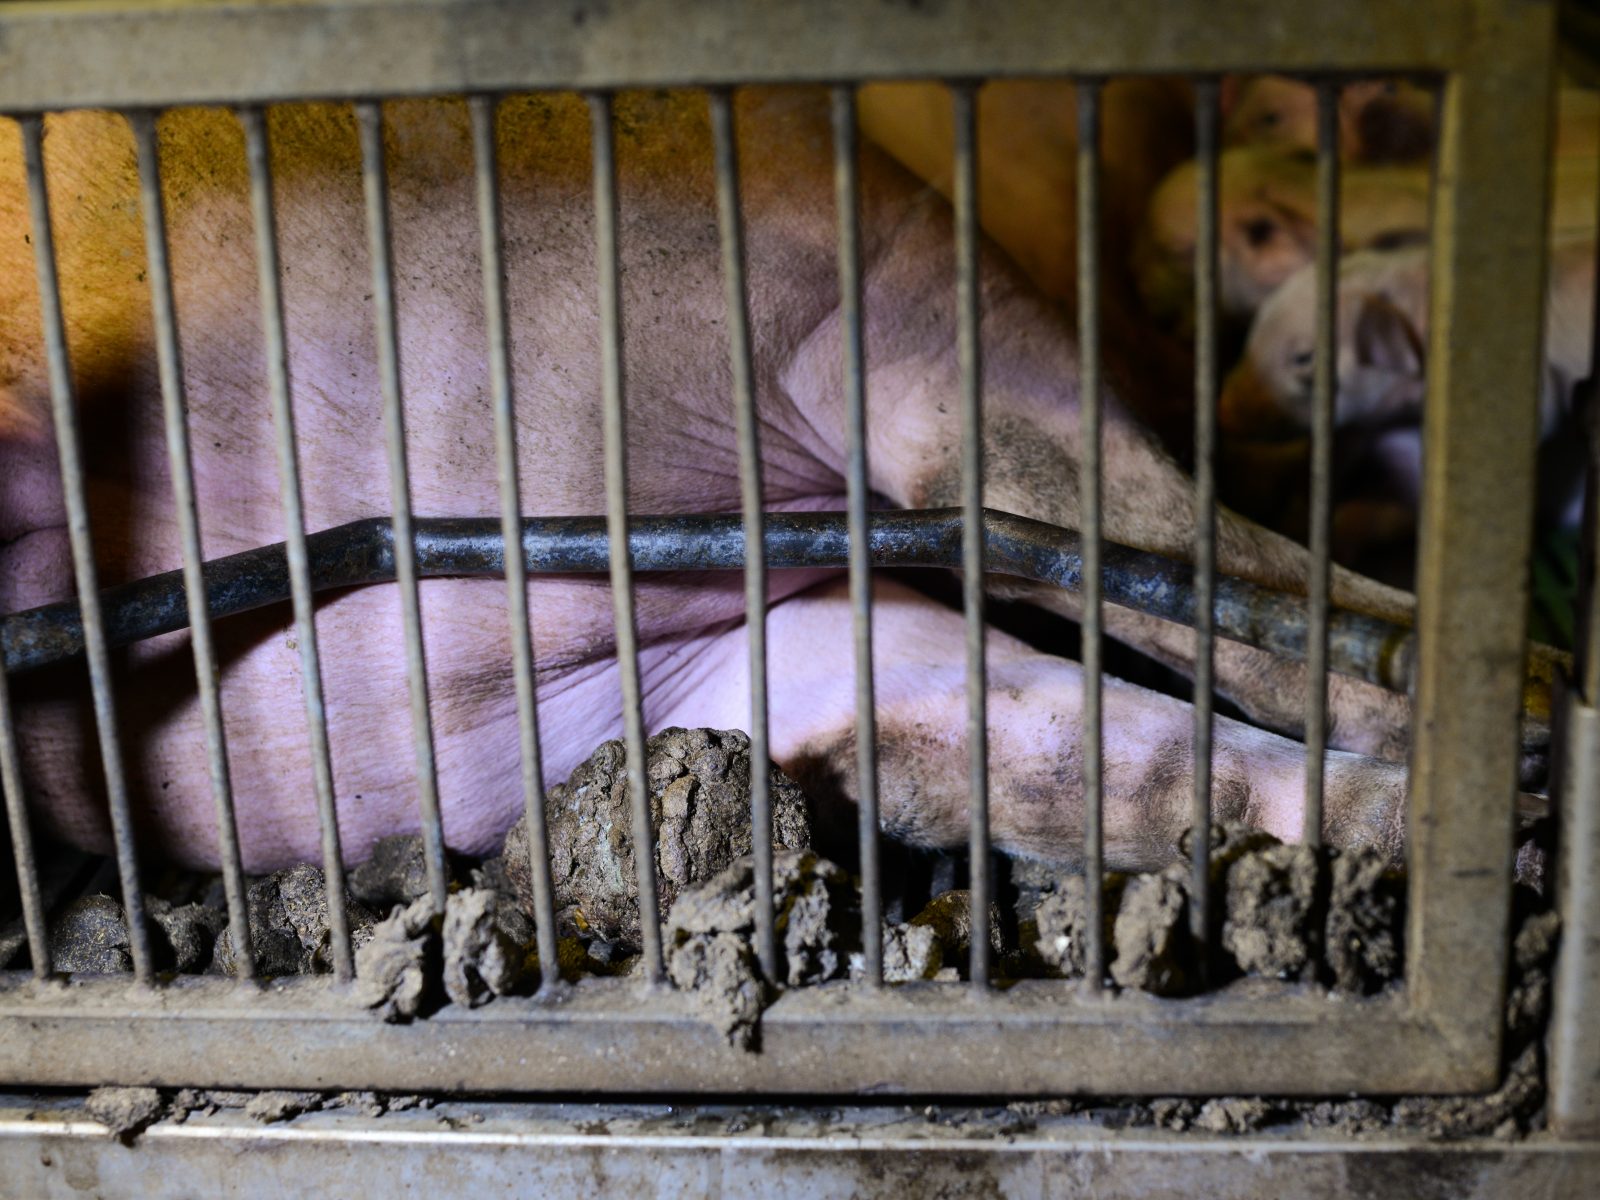 A sow is forced to lay with hindquarters pressed into the bars of her gestation crate and her own feces